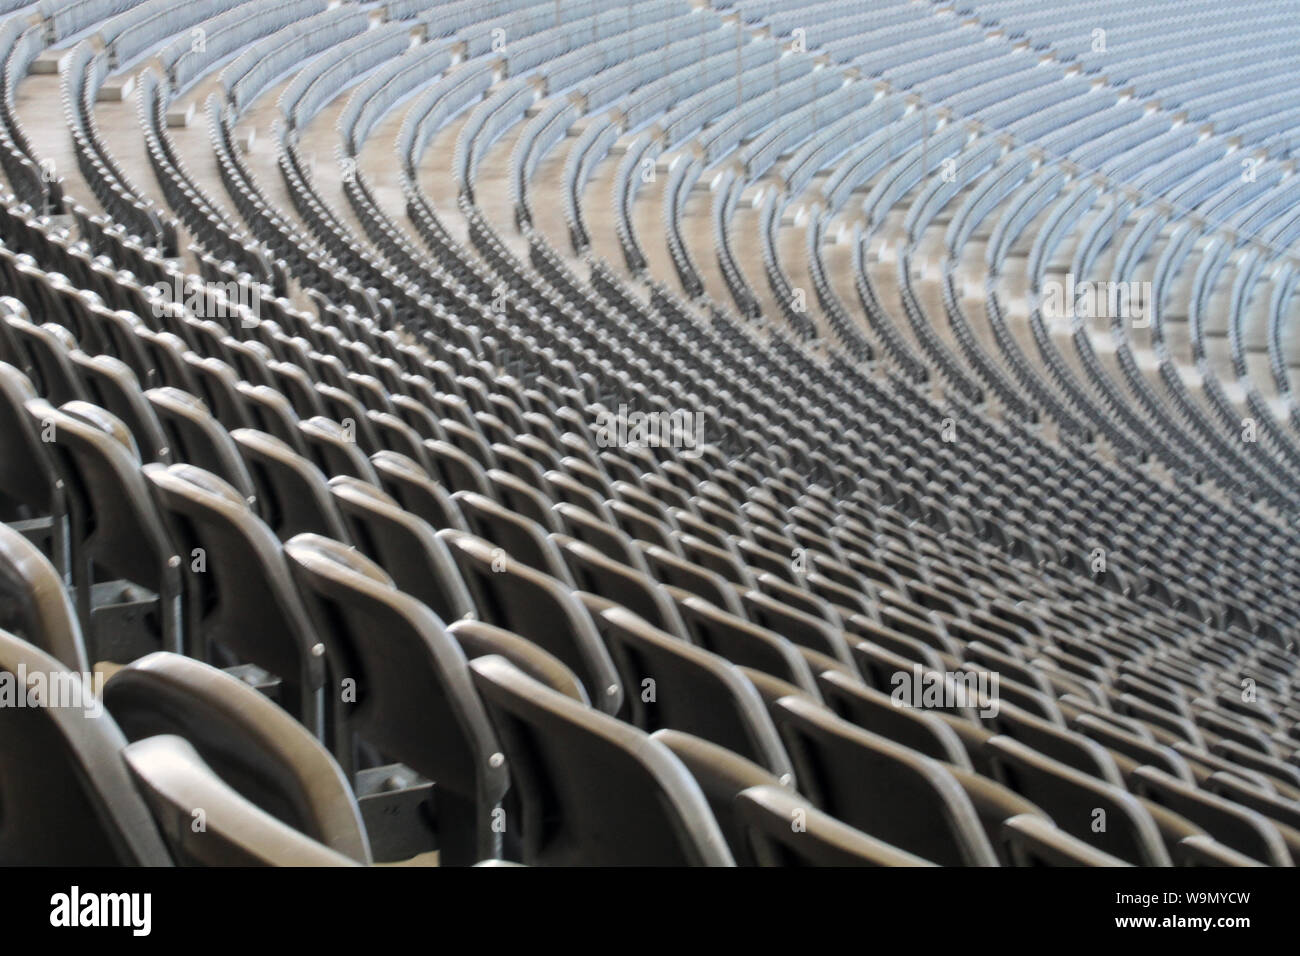 Olympic Stadium in Berlin, perfect alignment of the seats. Stock Photo